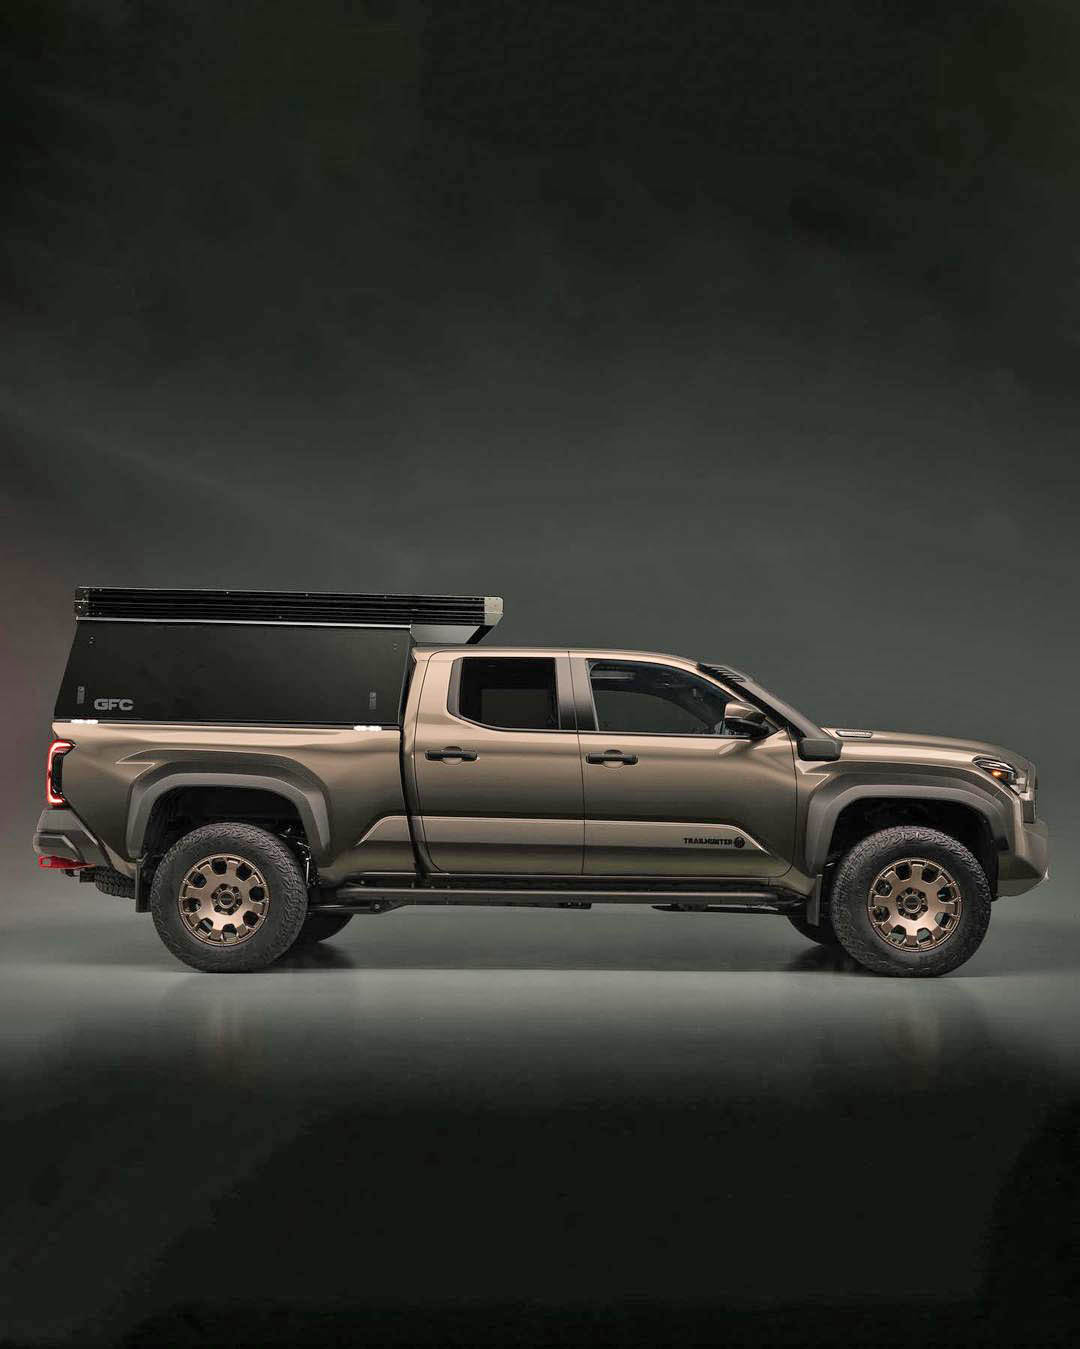 2024 Tacoma Payload, GVWR, GAWR Figures for 2024 Tacoma (published in owners manual) GFC Camper Topper Cap 2024 Tacoma 7